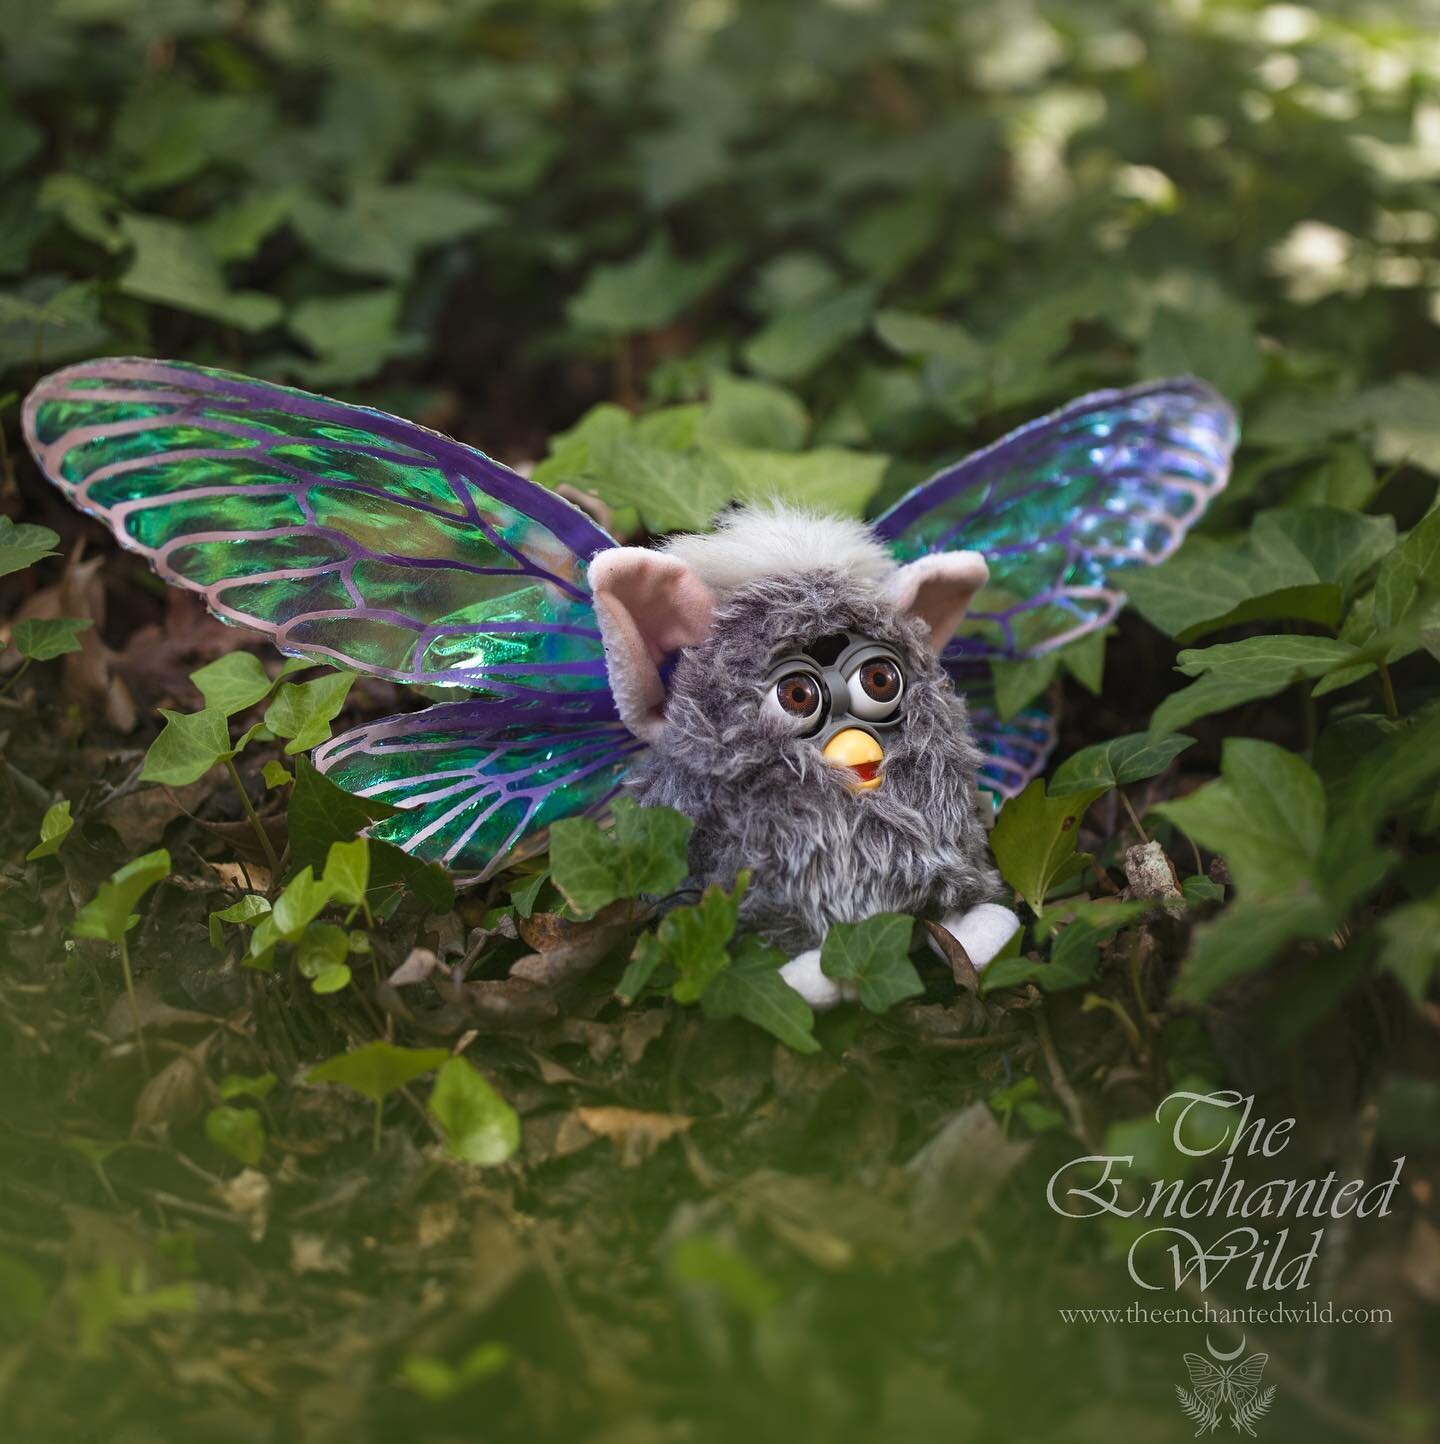 I&rsquo;ve finally updated my site with the varieties of customisable pet wings! Our animal companions are so magical and if yours enjoys playing dress-up they can now be a faerie with you! My Furby friend modelled each size available both to help vi